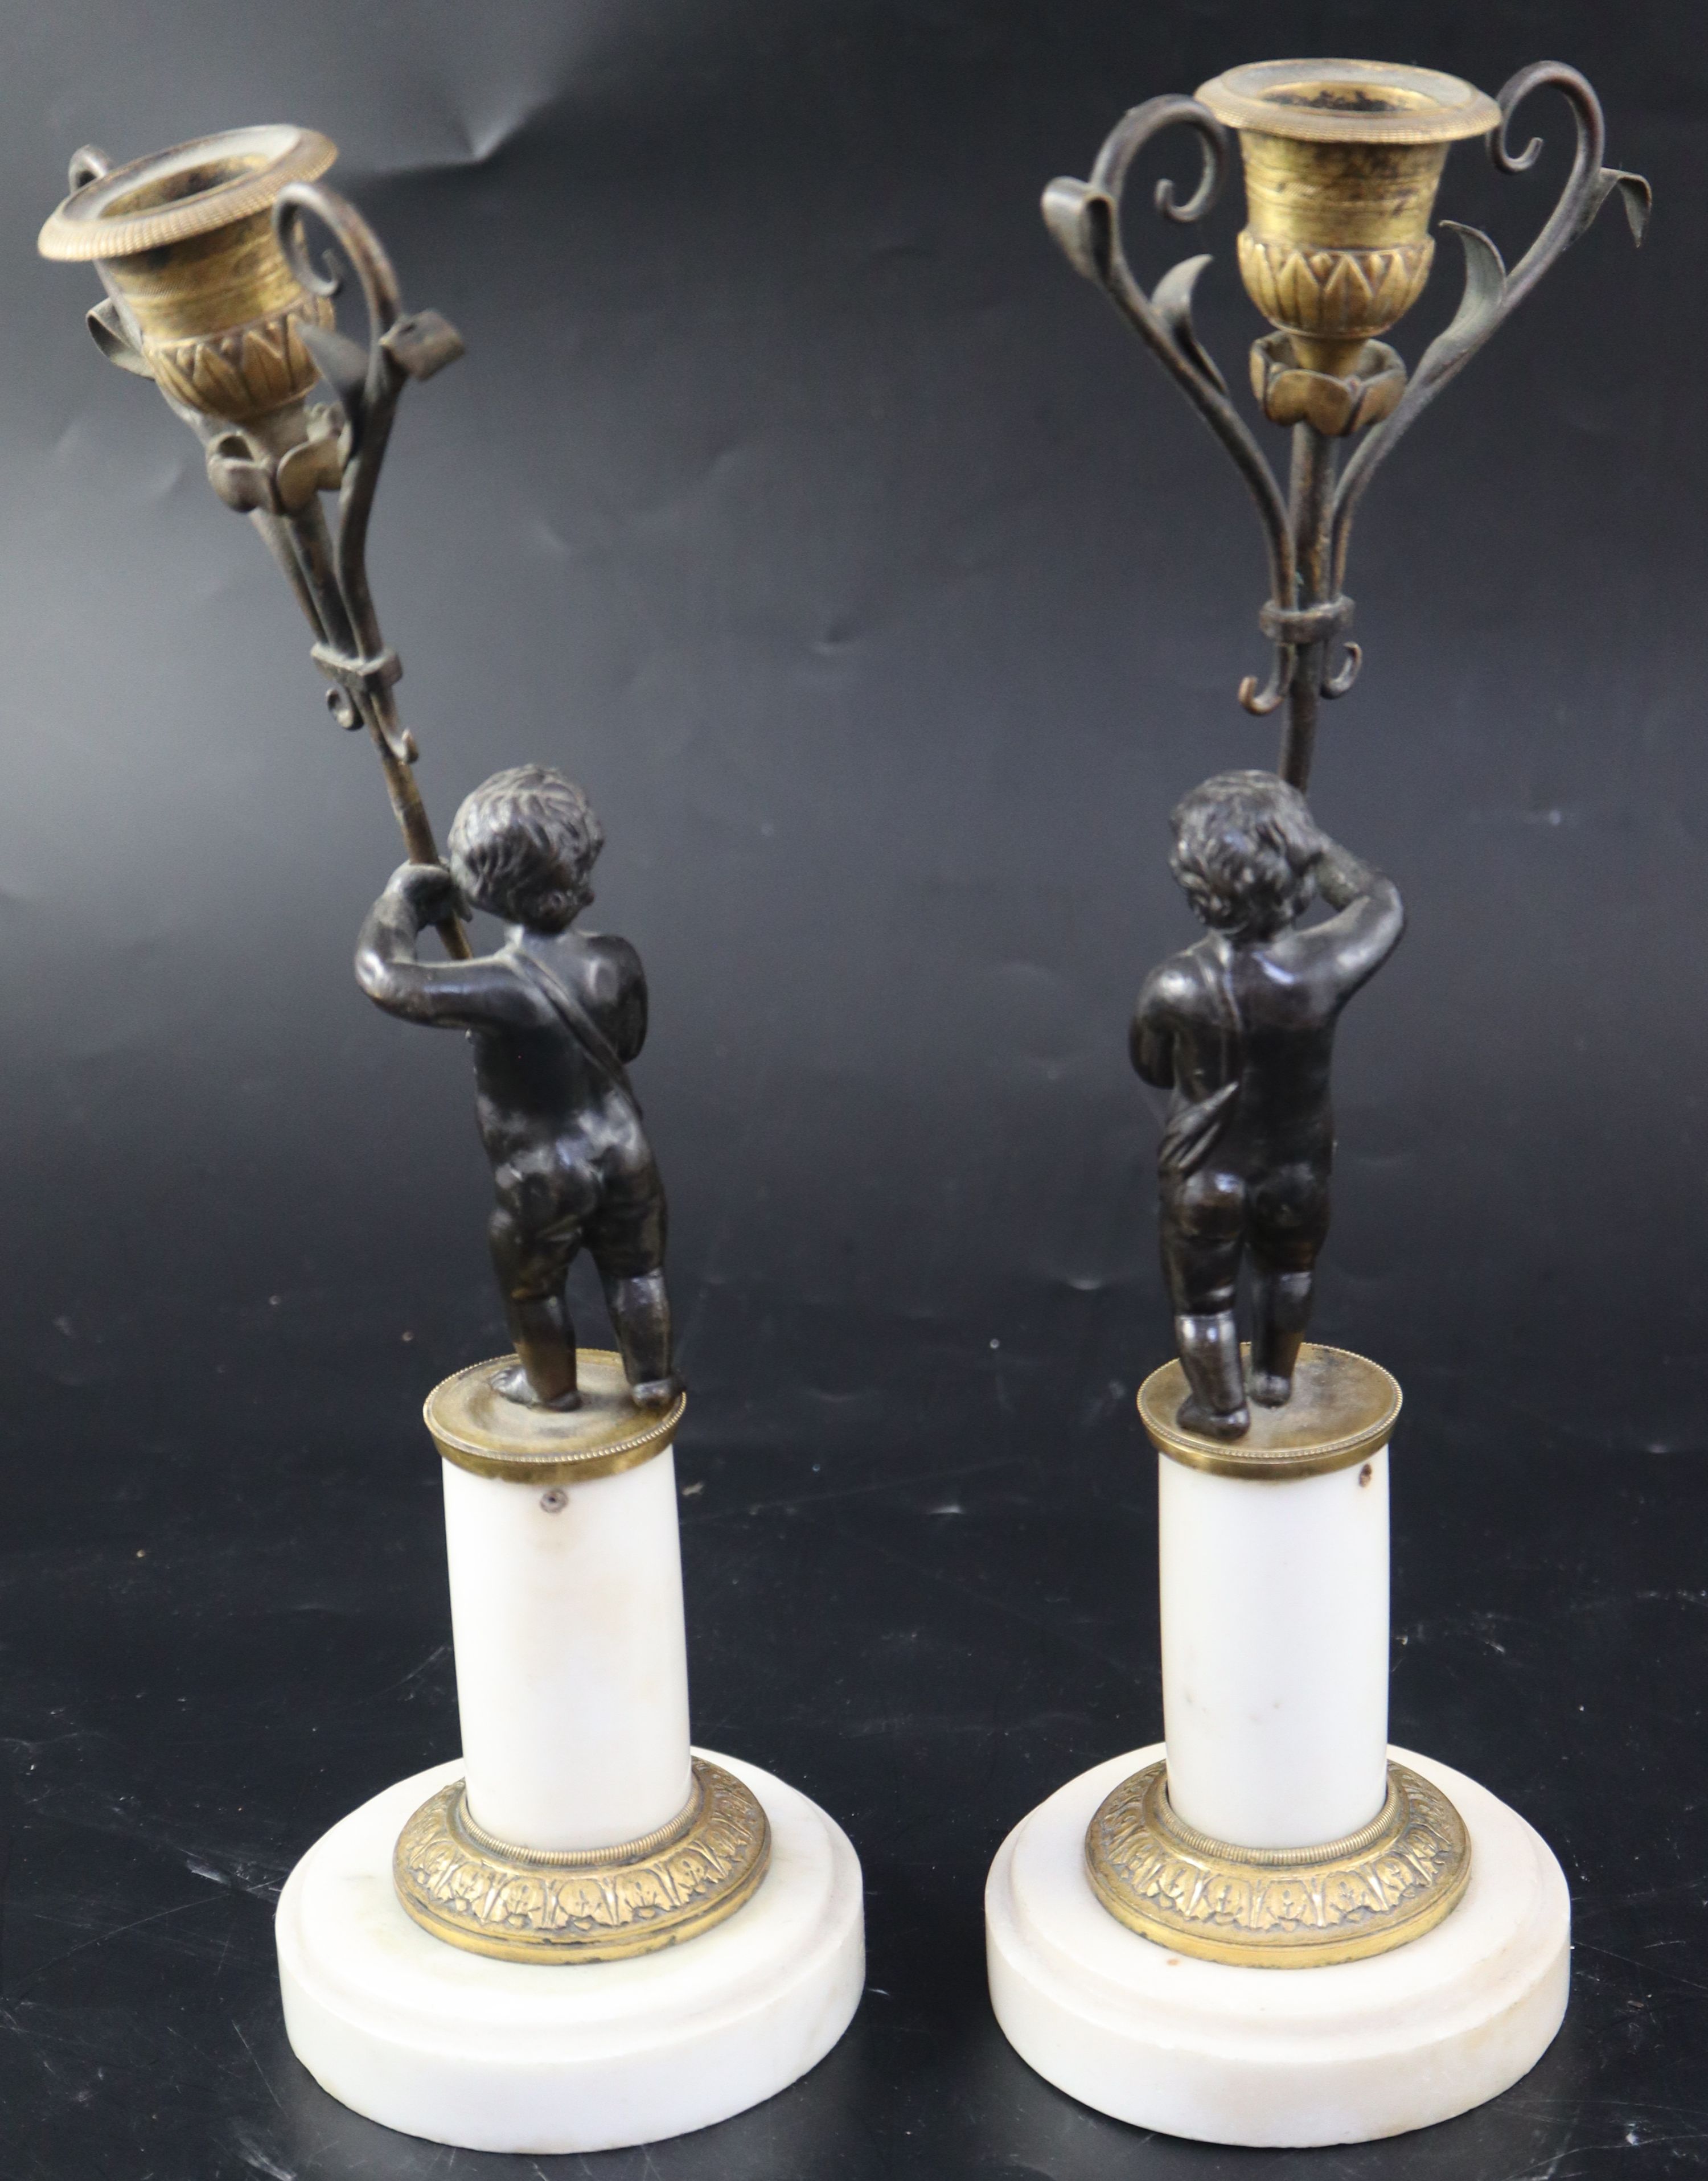 A pair of 19th century French bronze and ormolu candelabra, modelled with putti holding scrolling branches